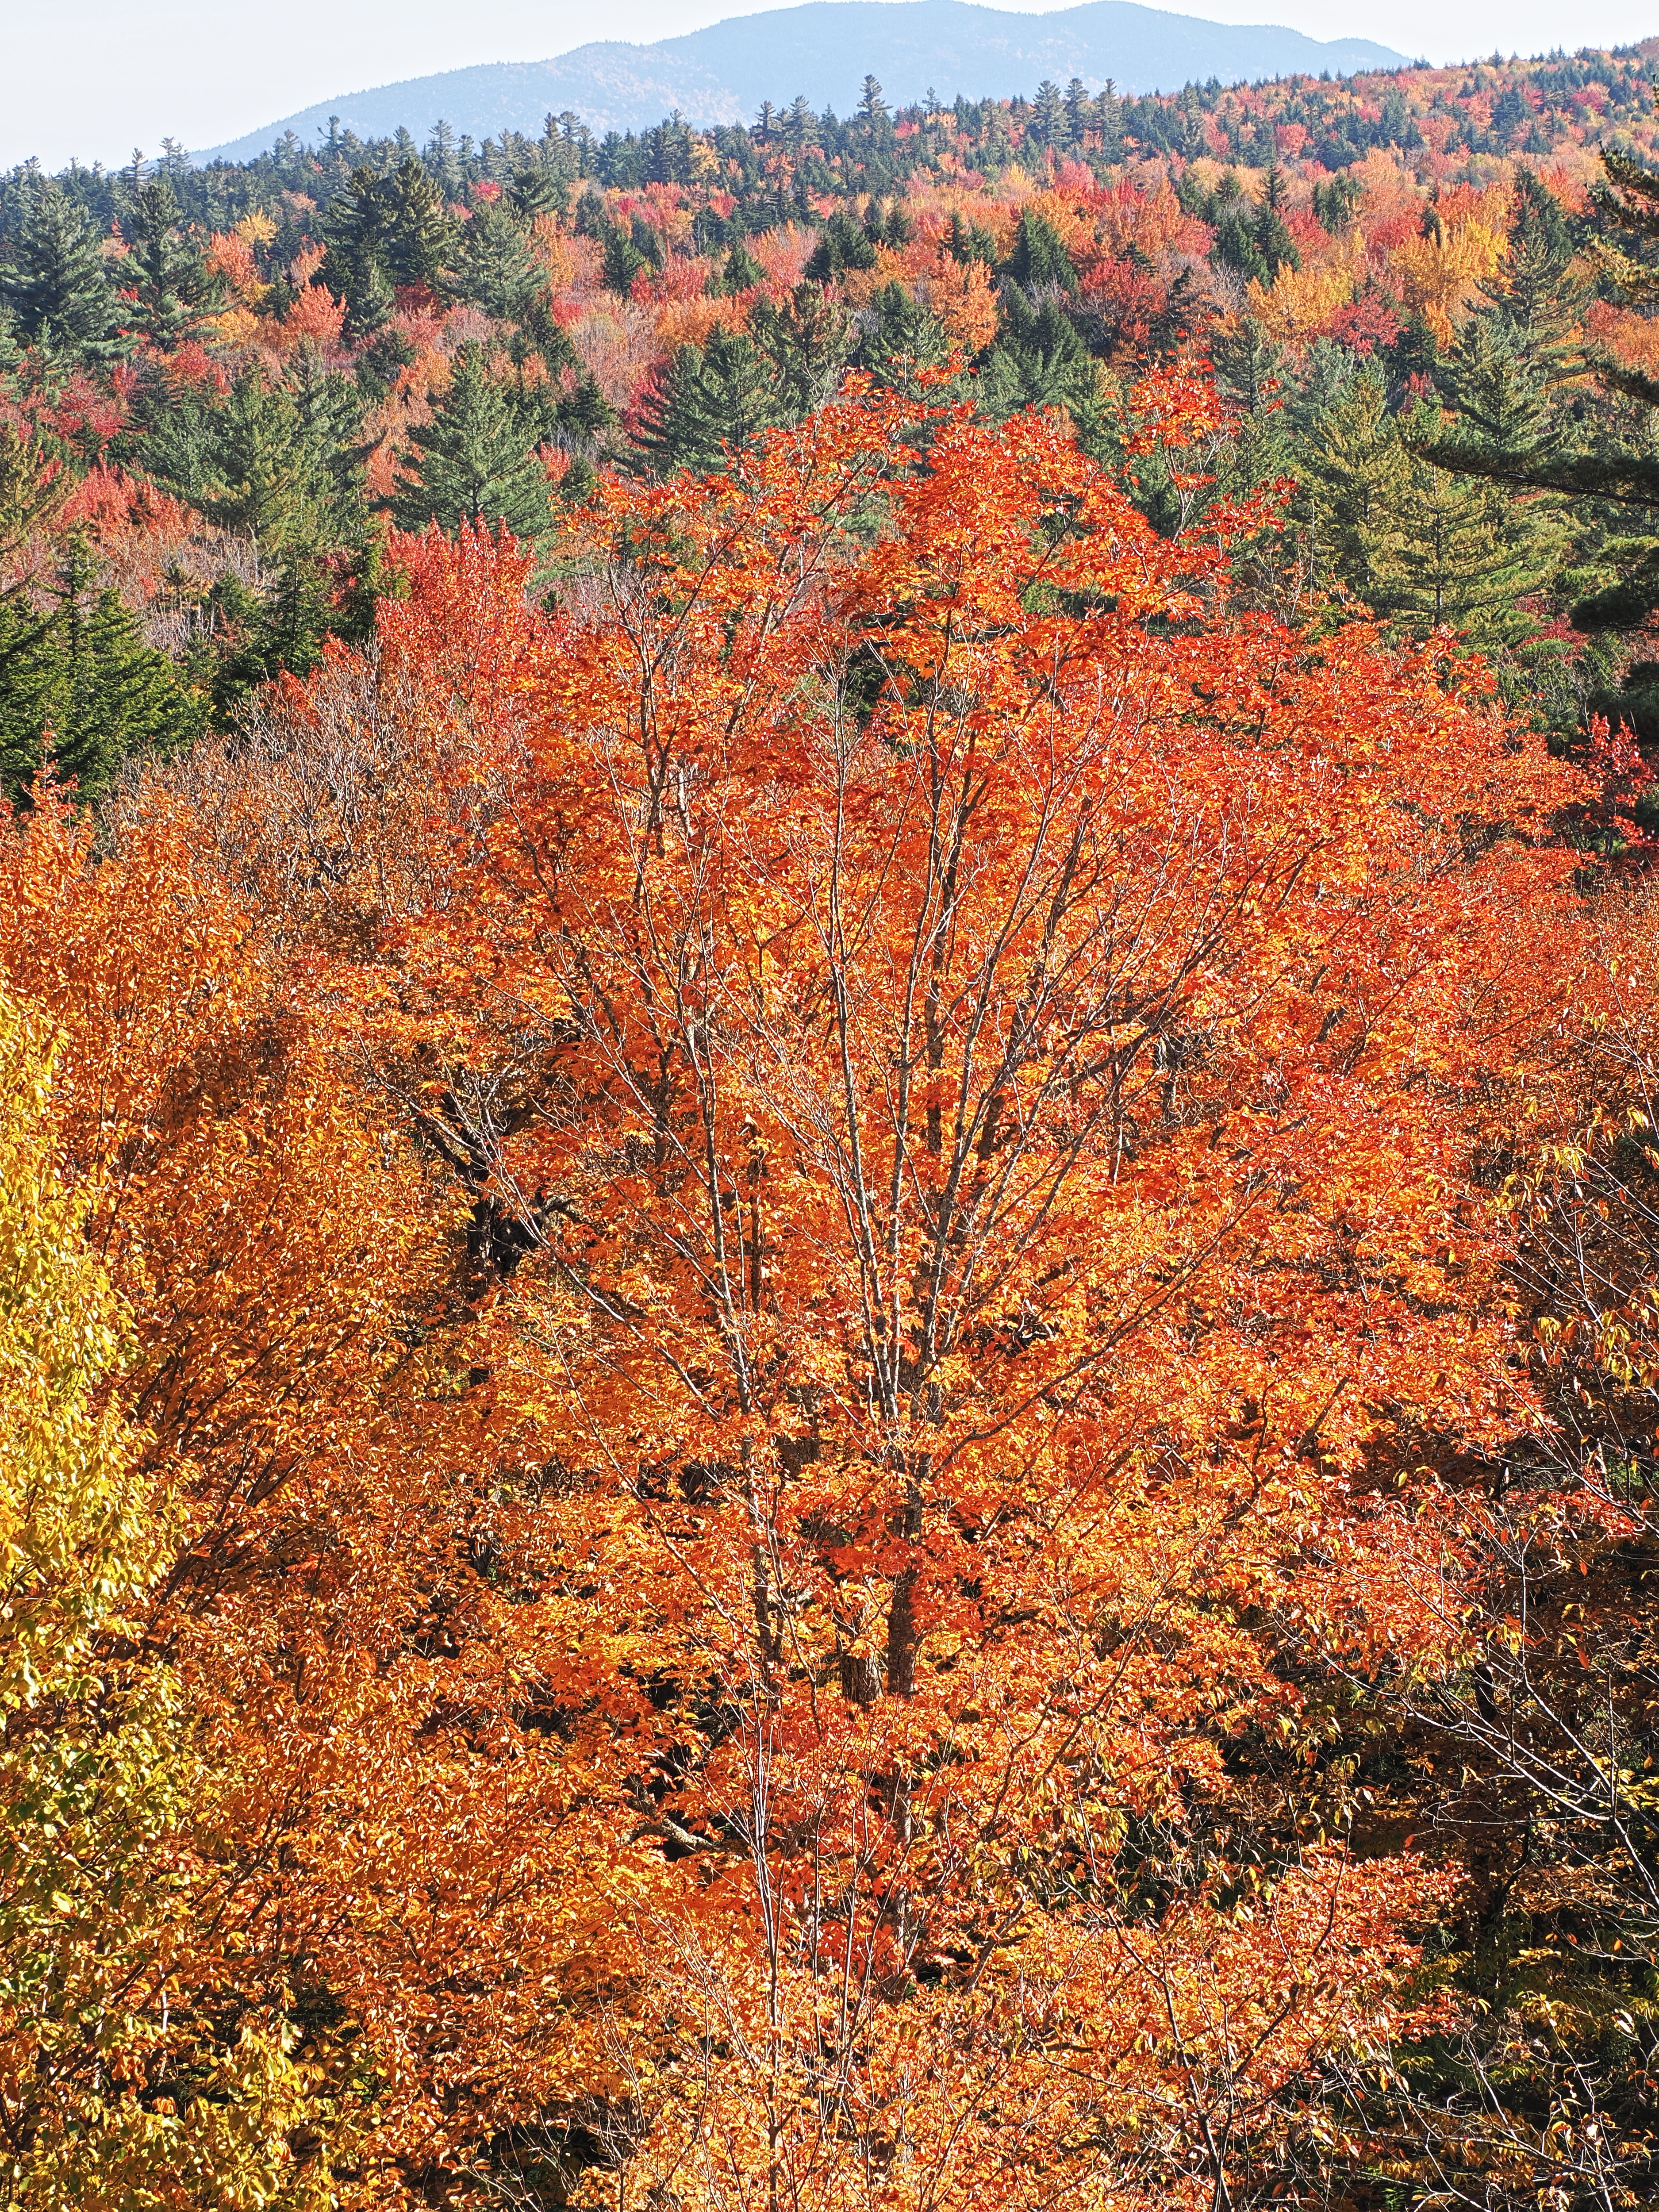 Fall colors at the Kancamagus Scenic Byway #20